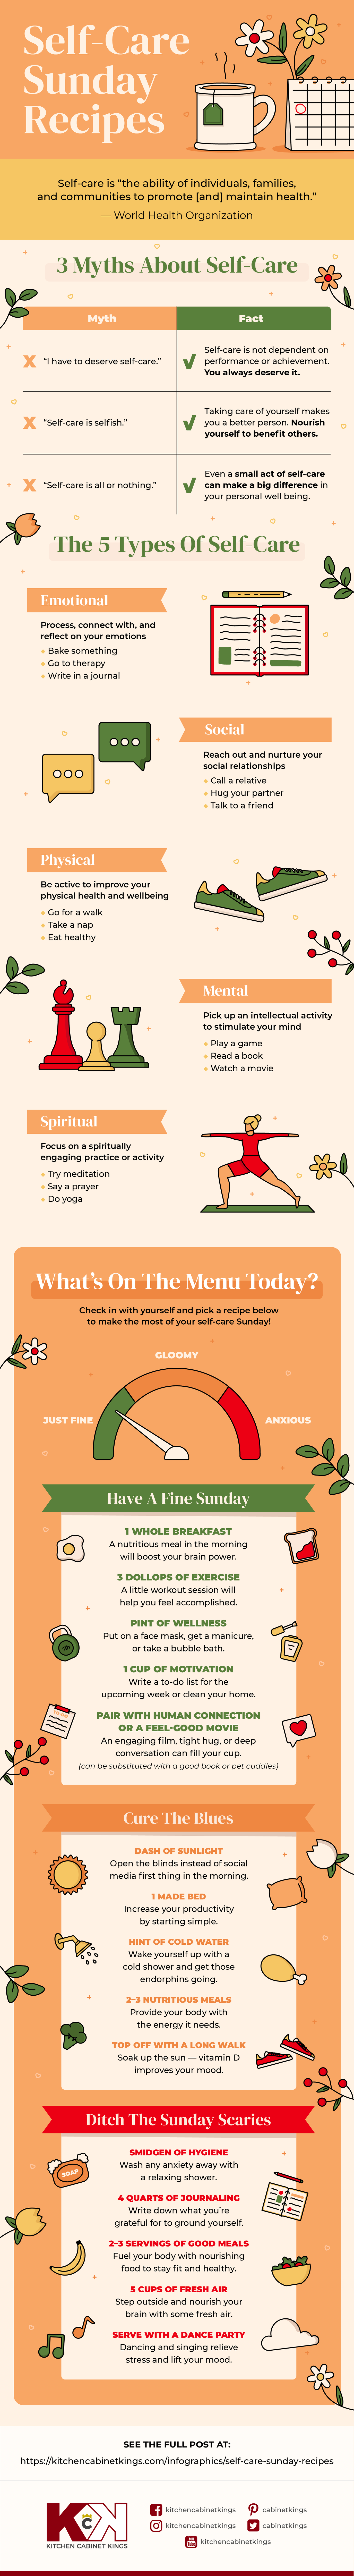 This infographic goes into detail about the five different types of self care and gives some recipes for a Self Care Sunday